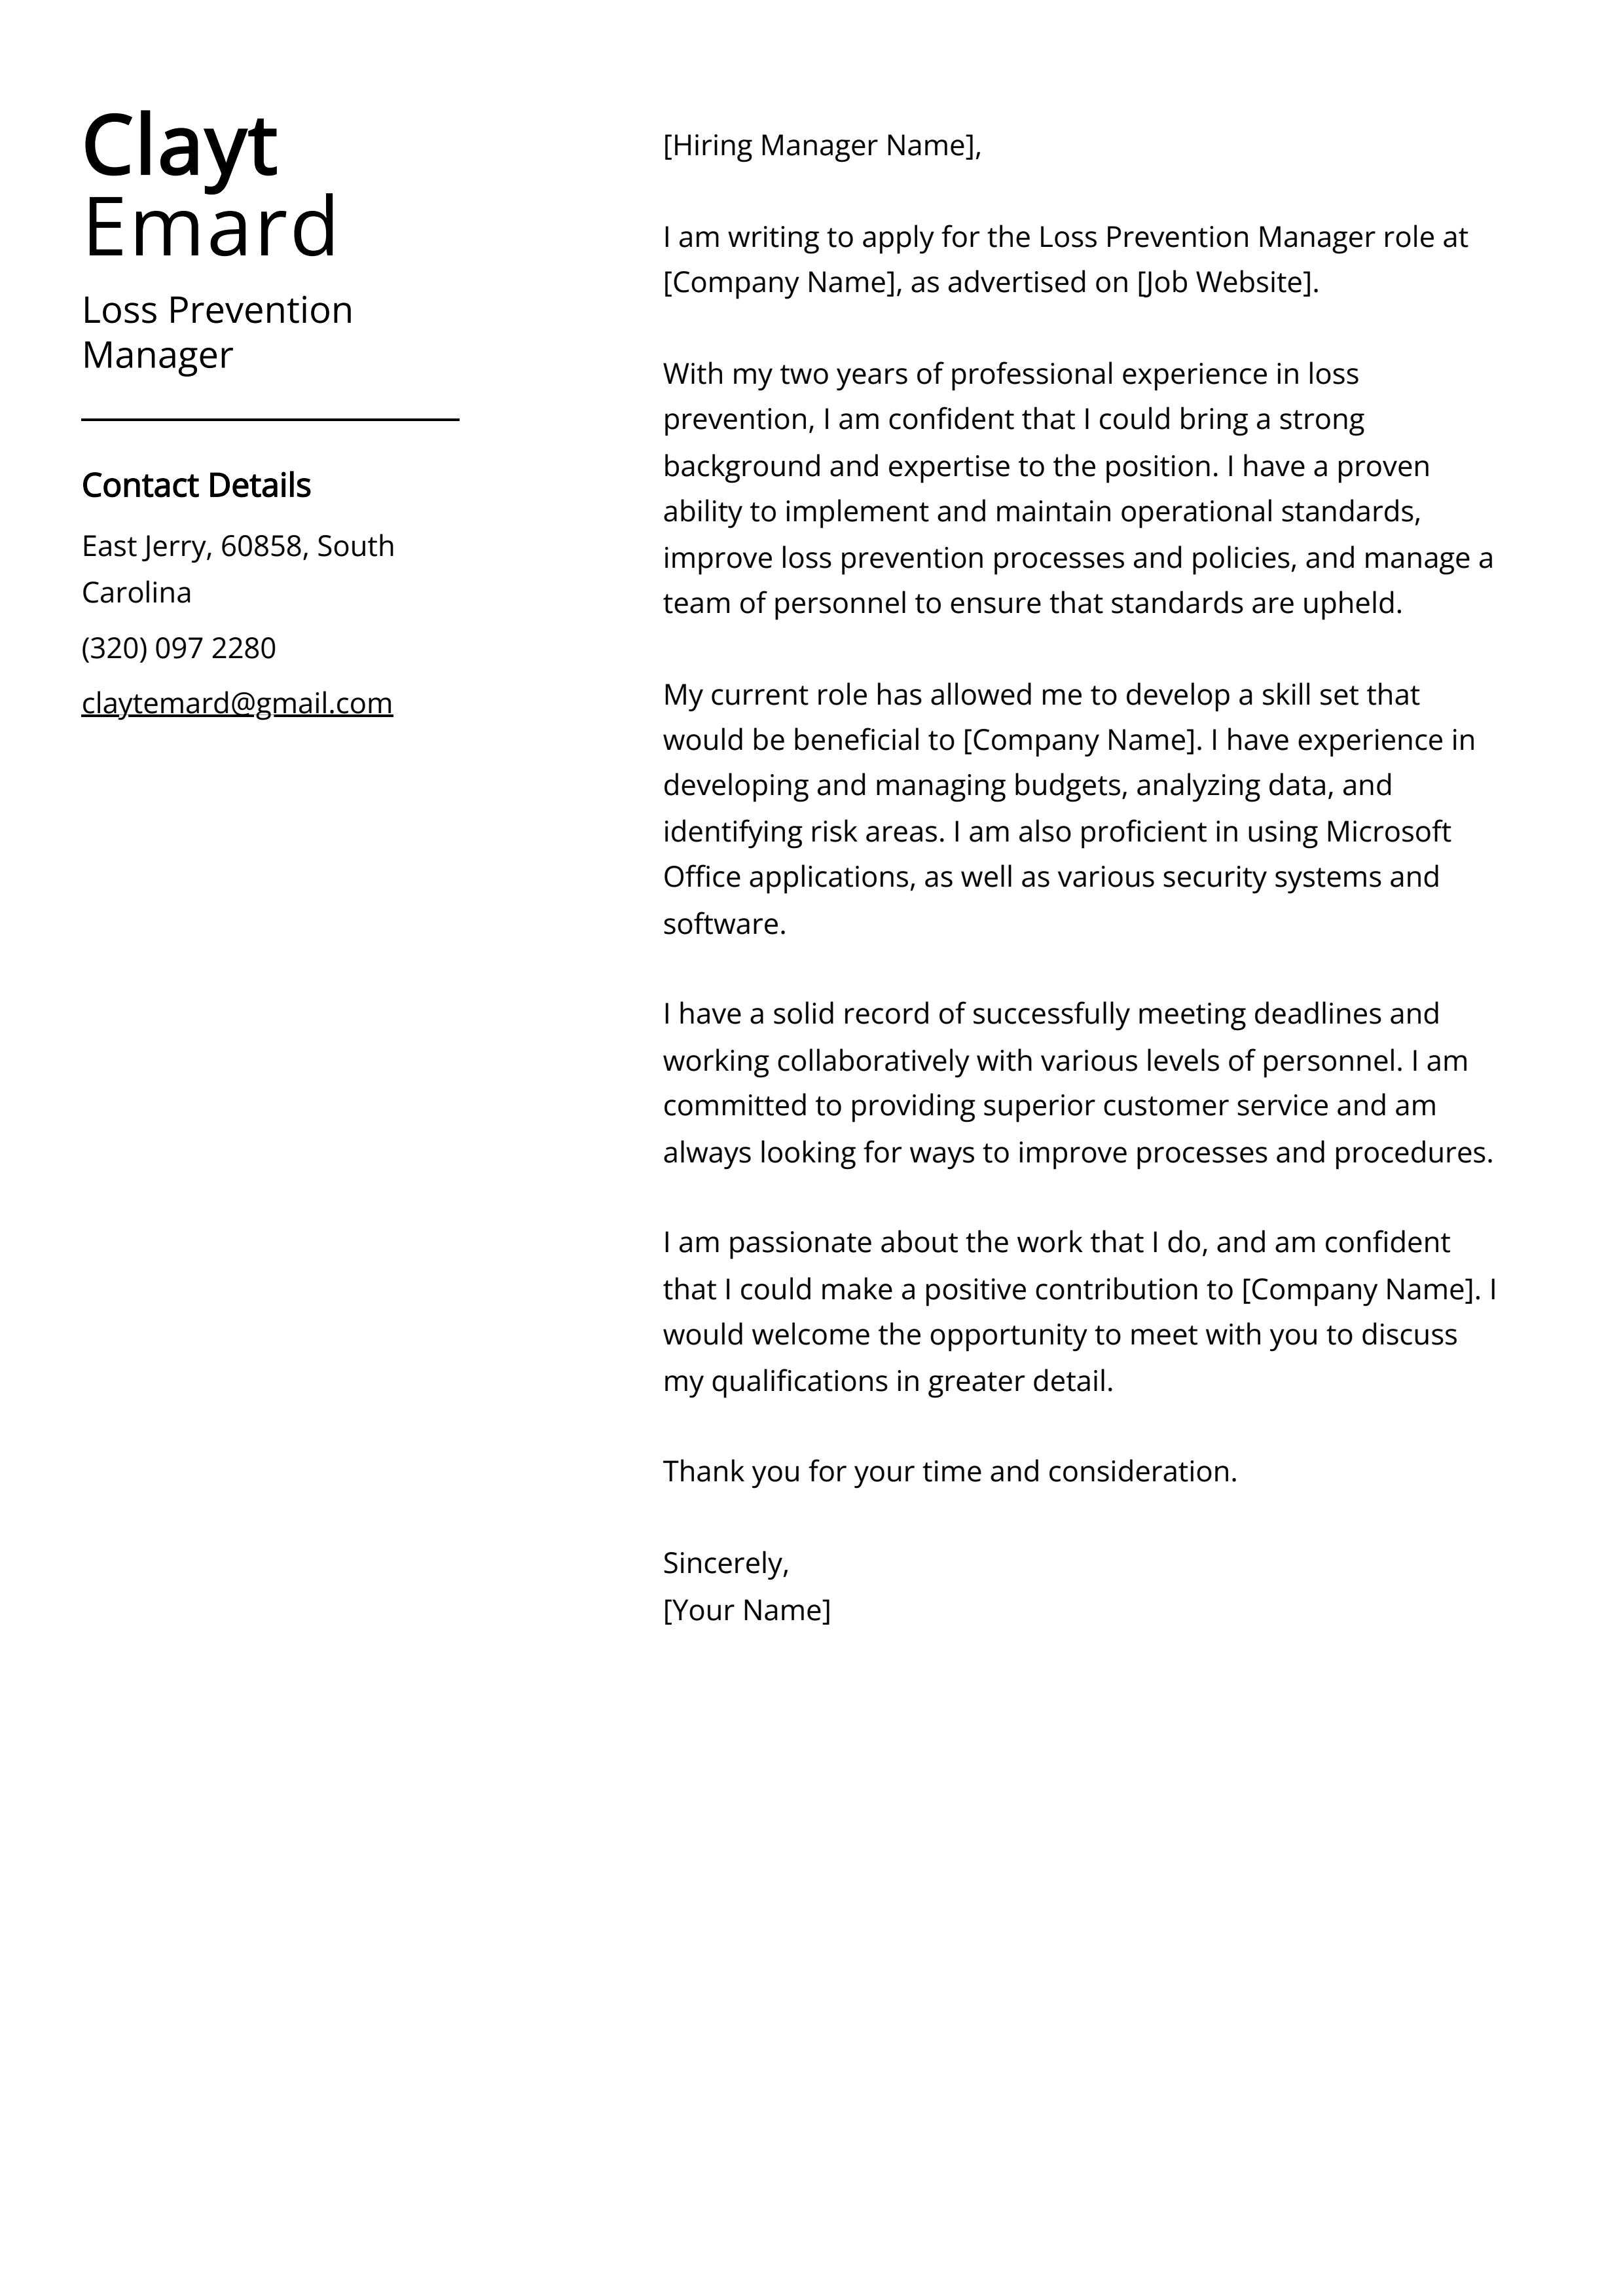 Loss Prevention Manager Cover Letter Example